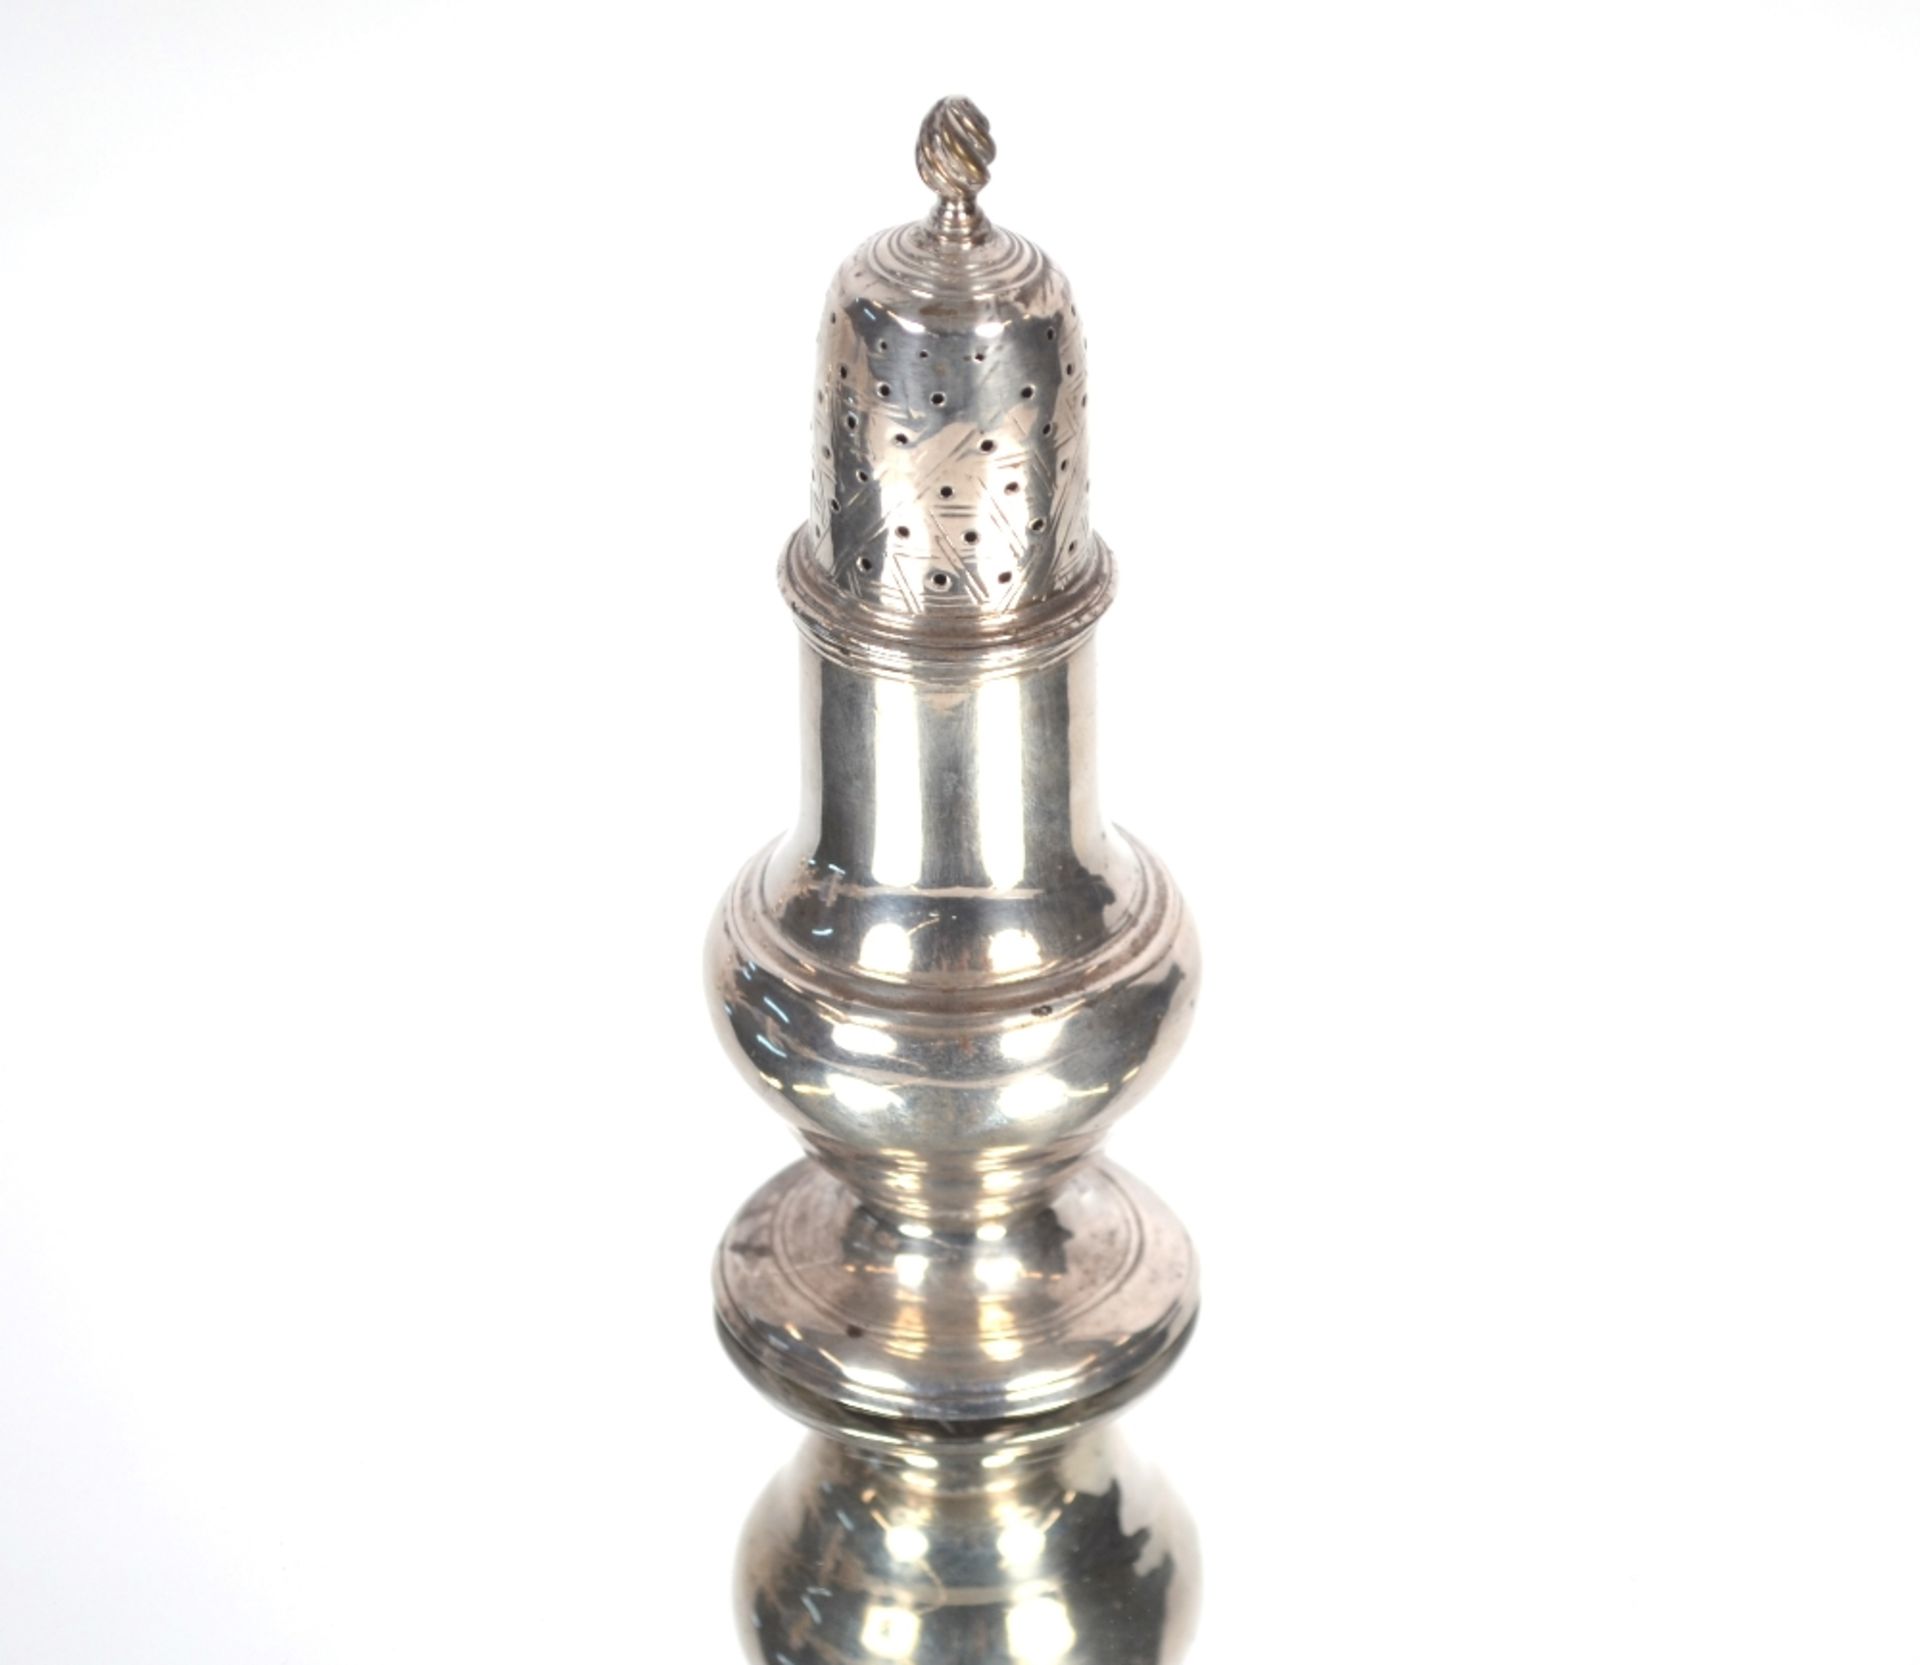 A George III silver baluster pepper pot by R Pears